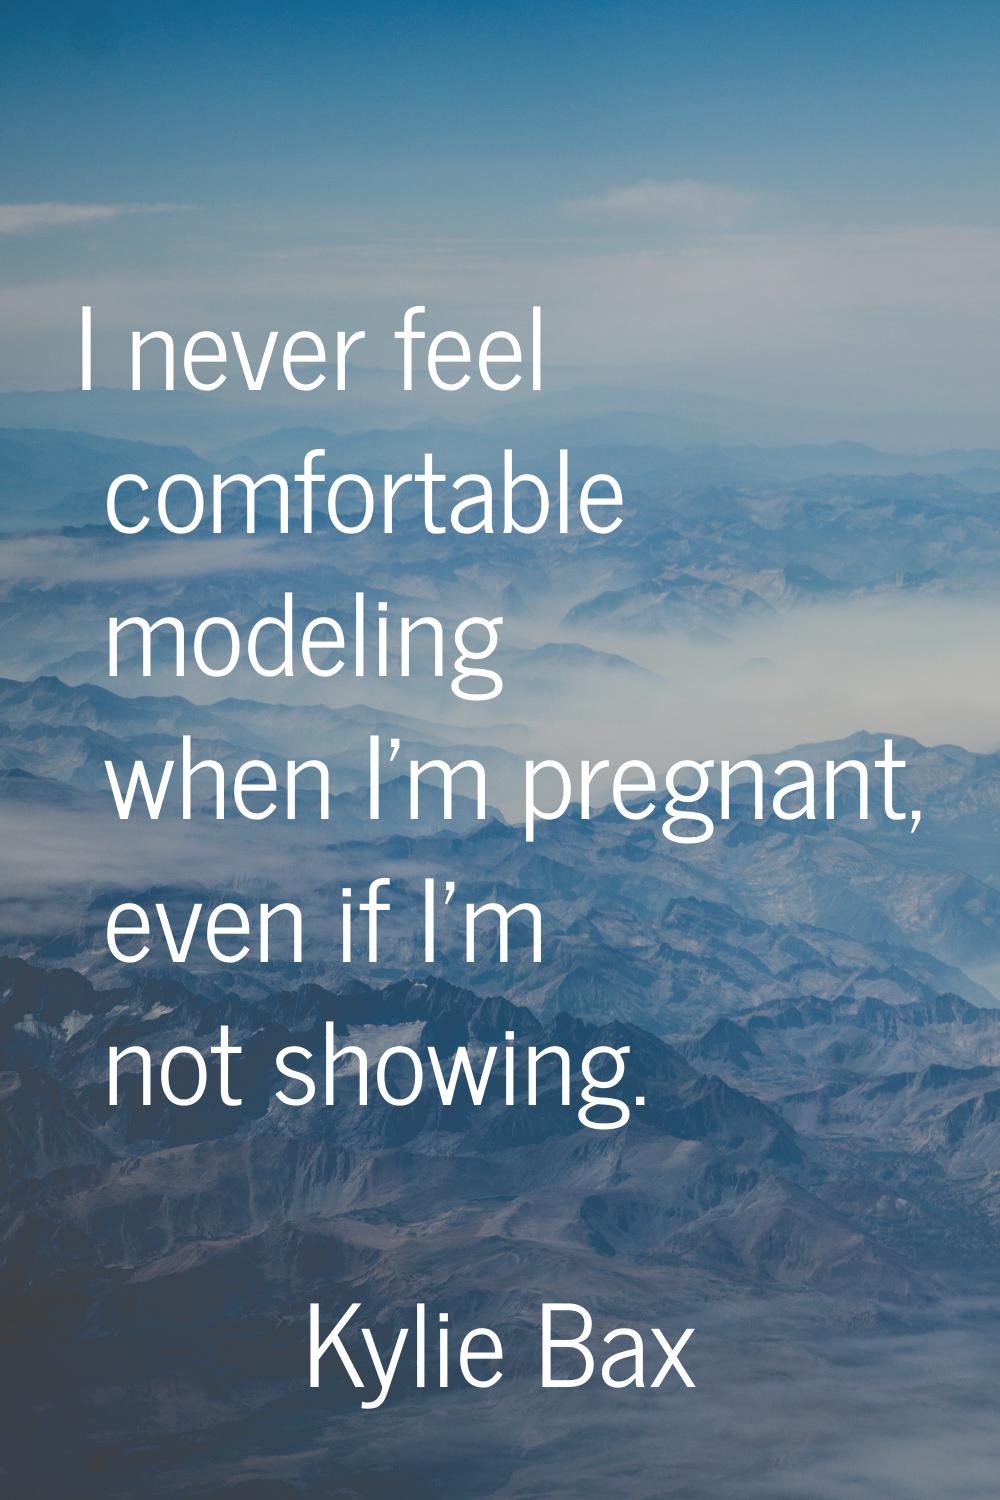 I never feel comfortable modeling when I'm pregnant, even if I'm not showing.